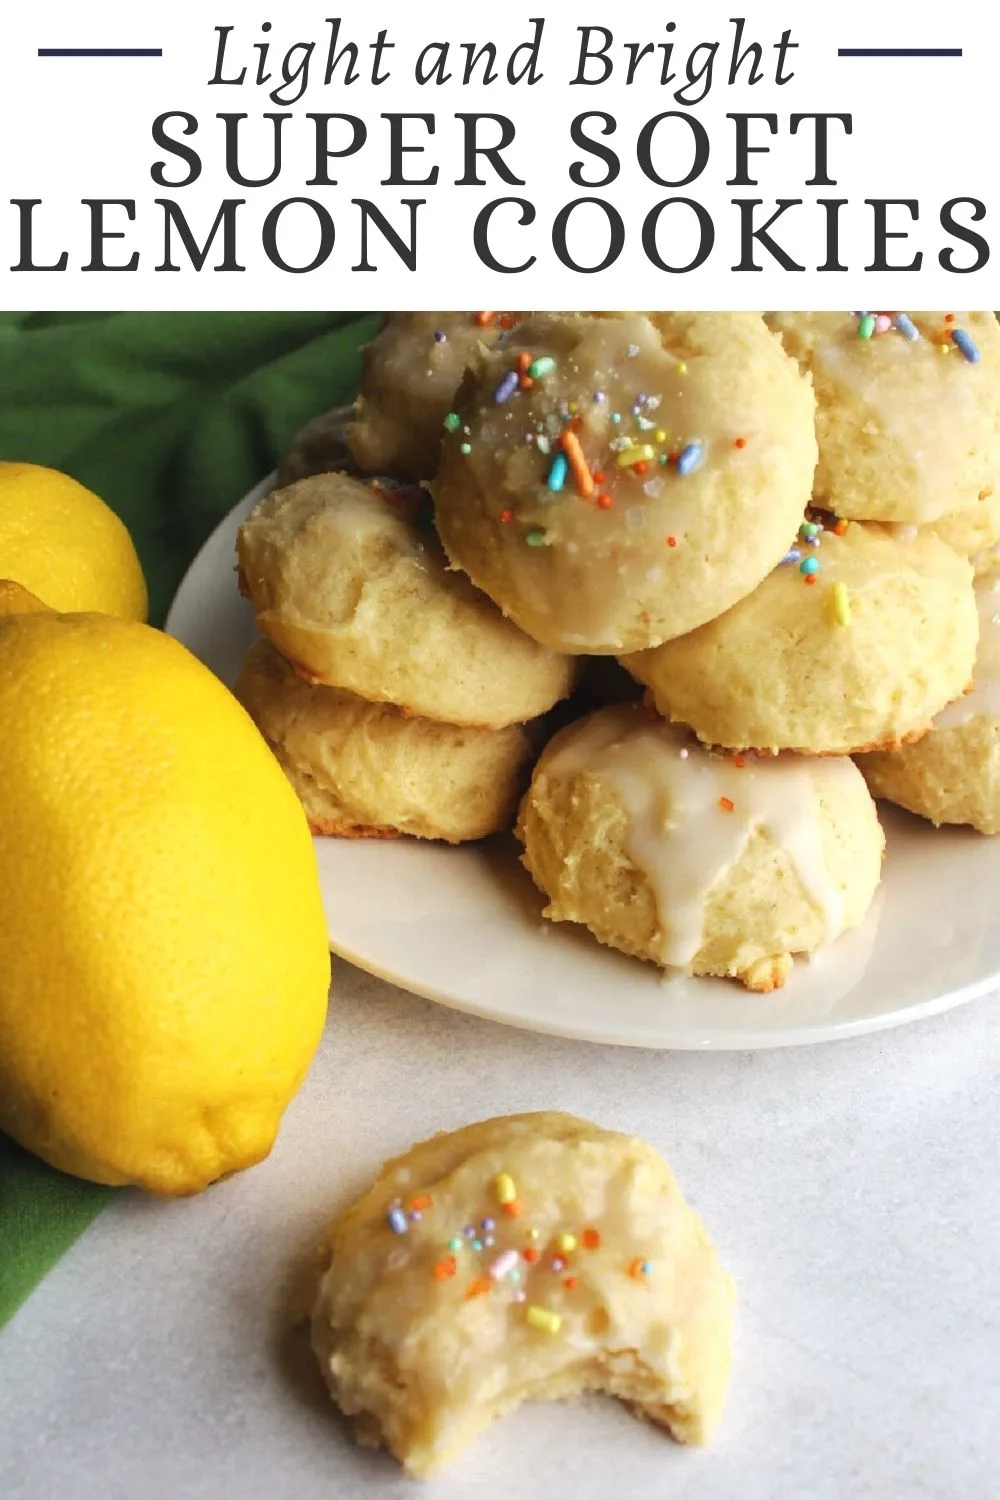 Super soft lemon cookies are loaded with cream cheese and fresh lemon. They are pillowy and delicious with the right balance of sweet and tangy citrus.